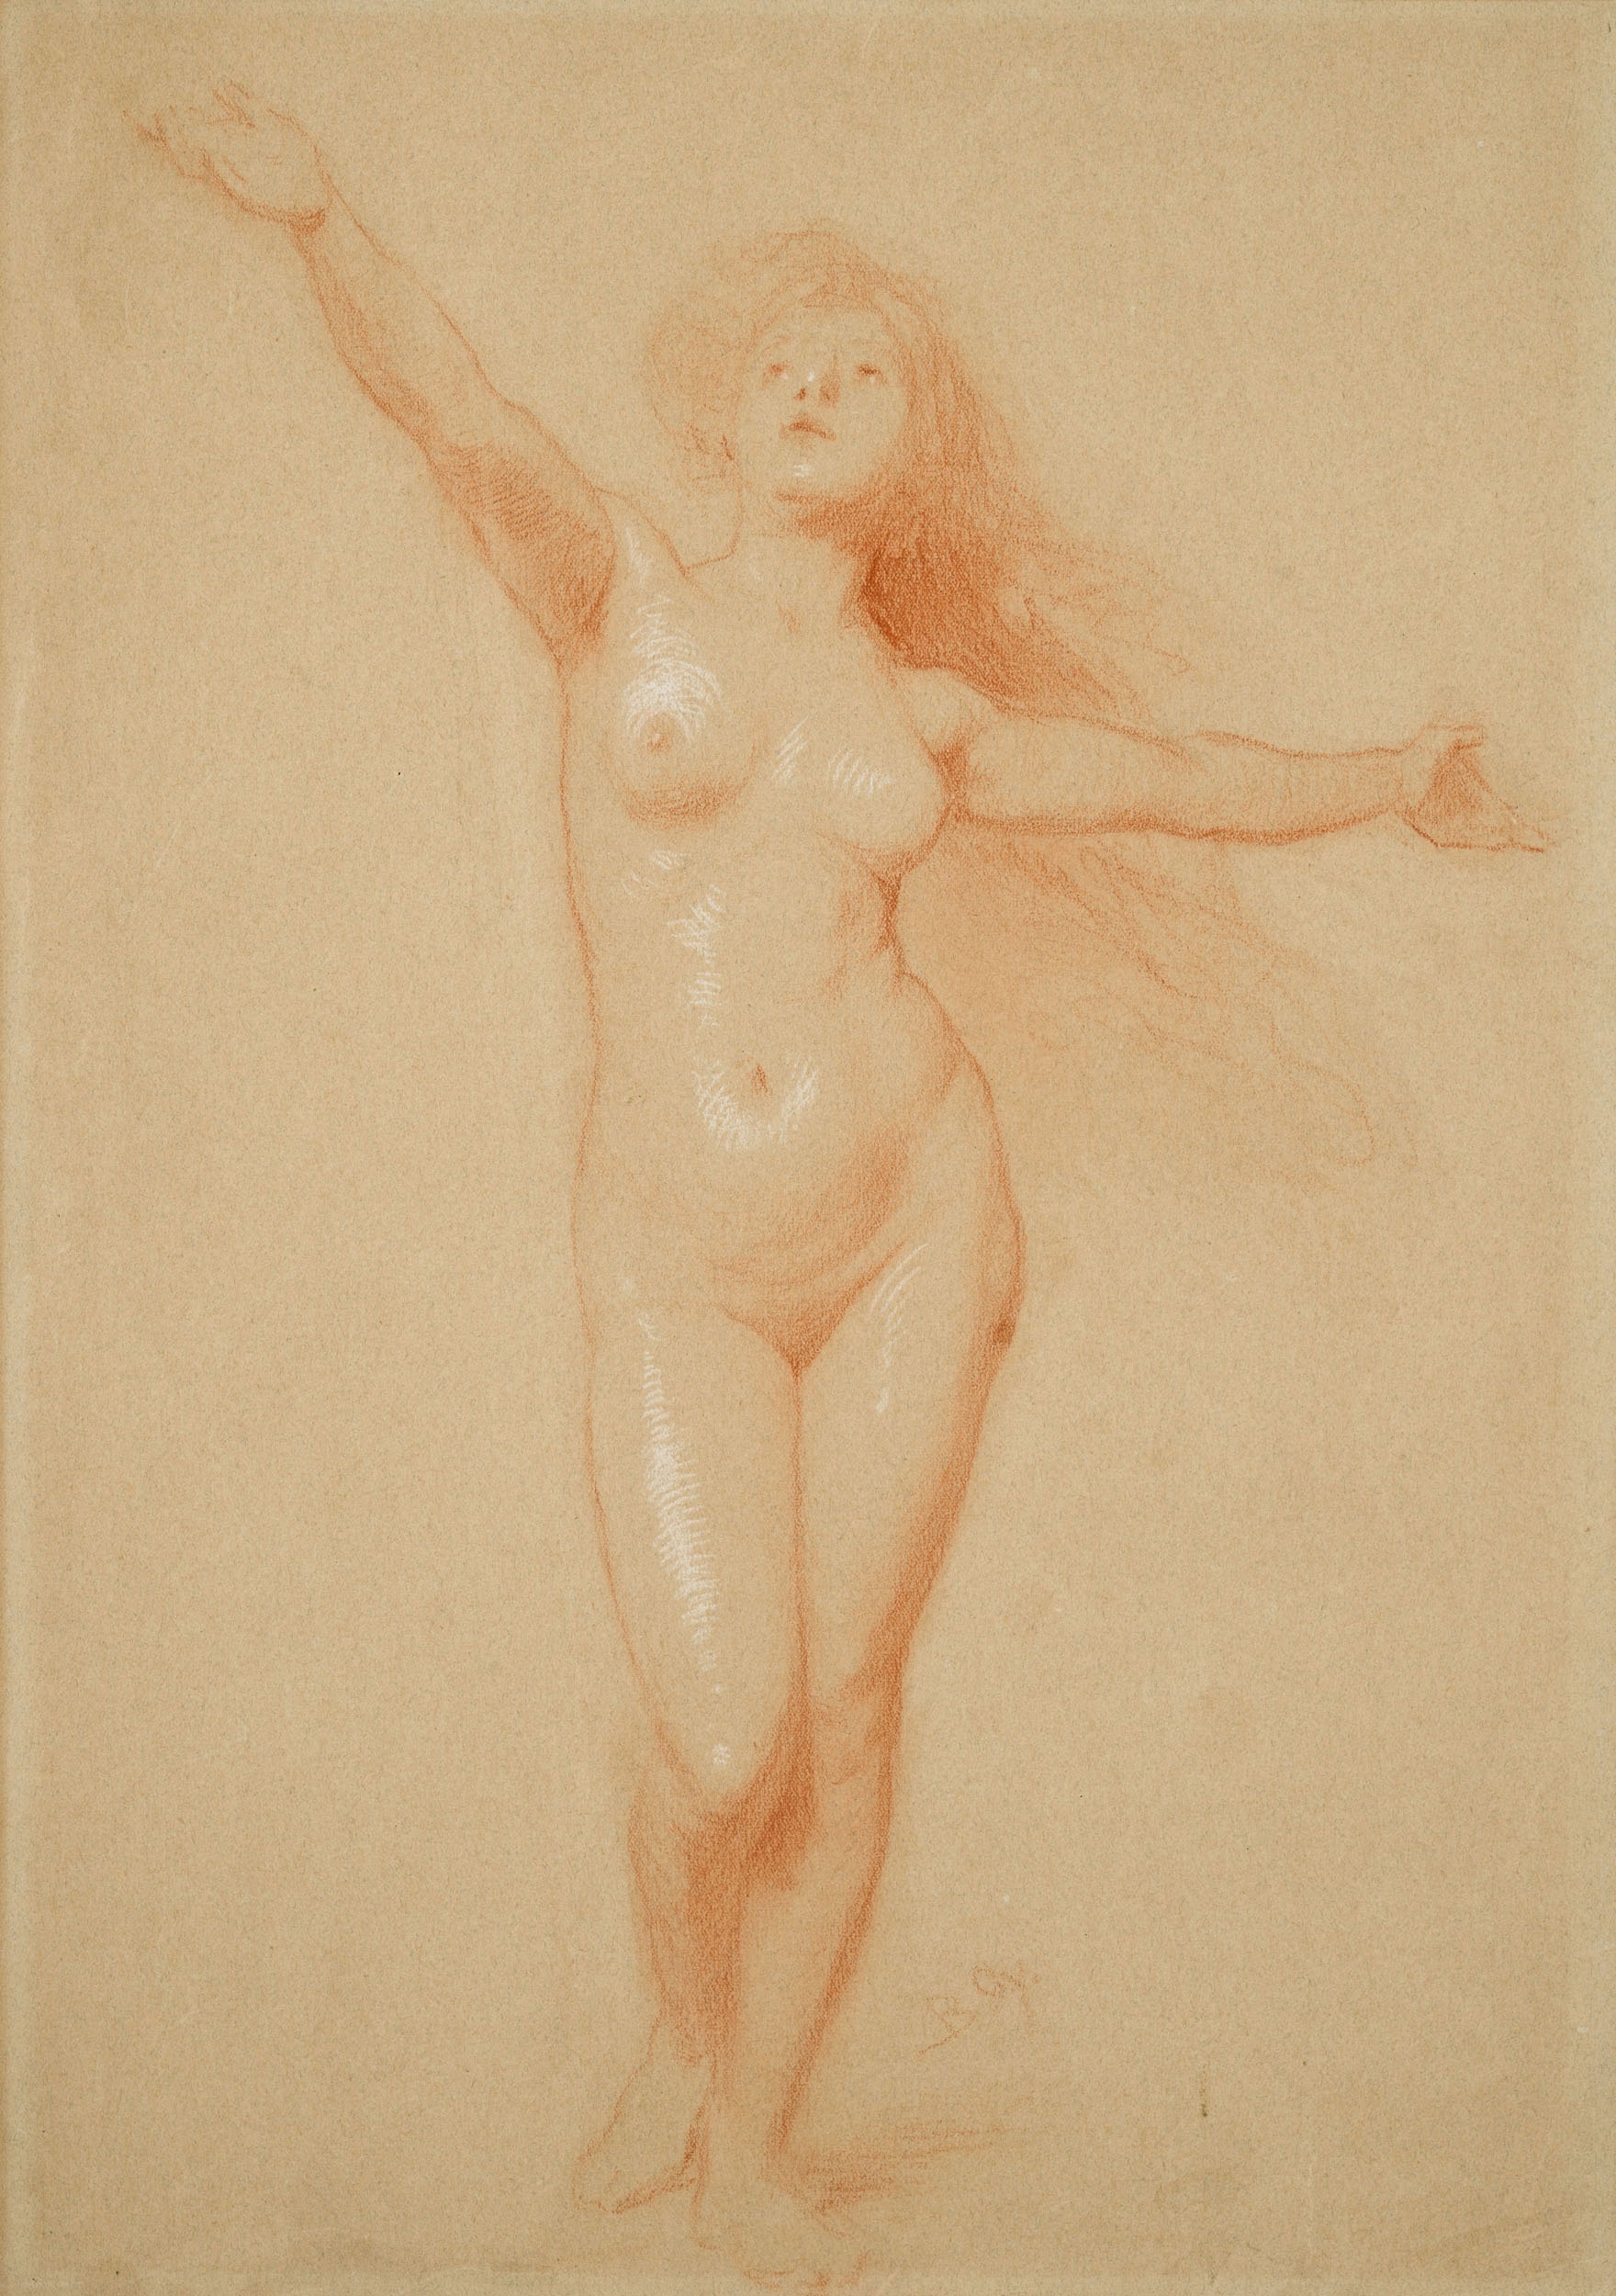 study of a female nude

(The Salgo Trust for Education CC BY-NC-SA)